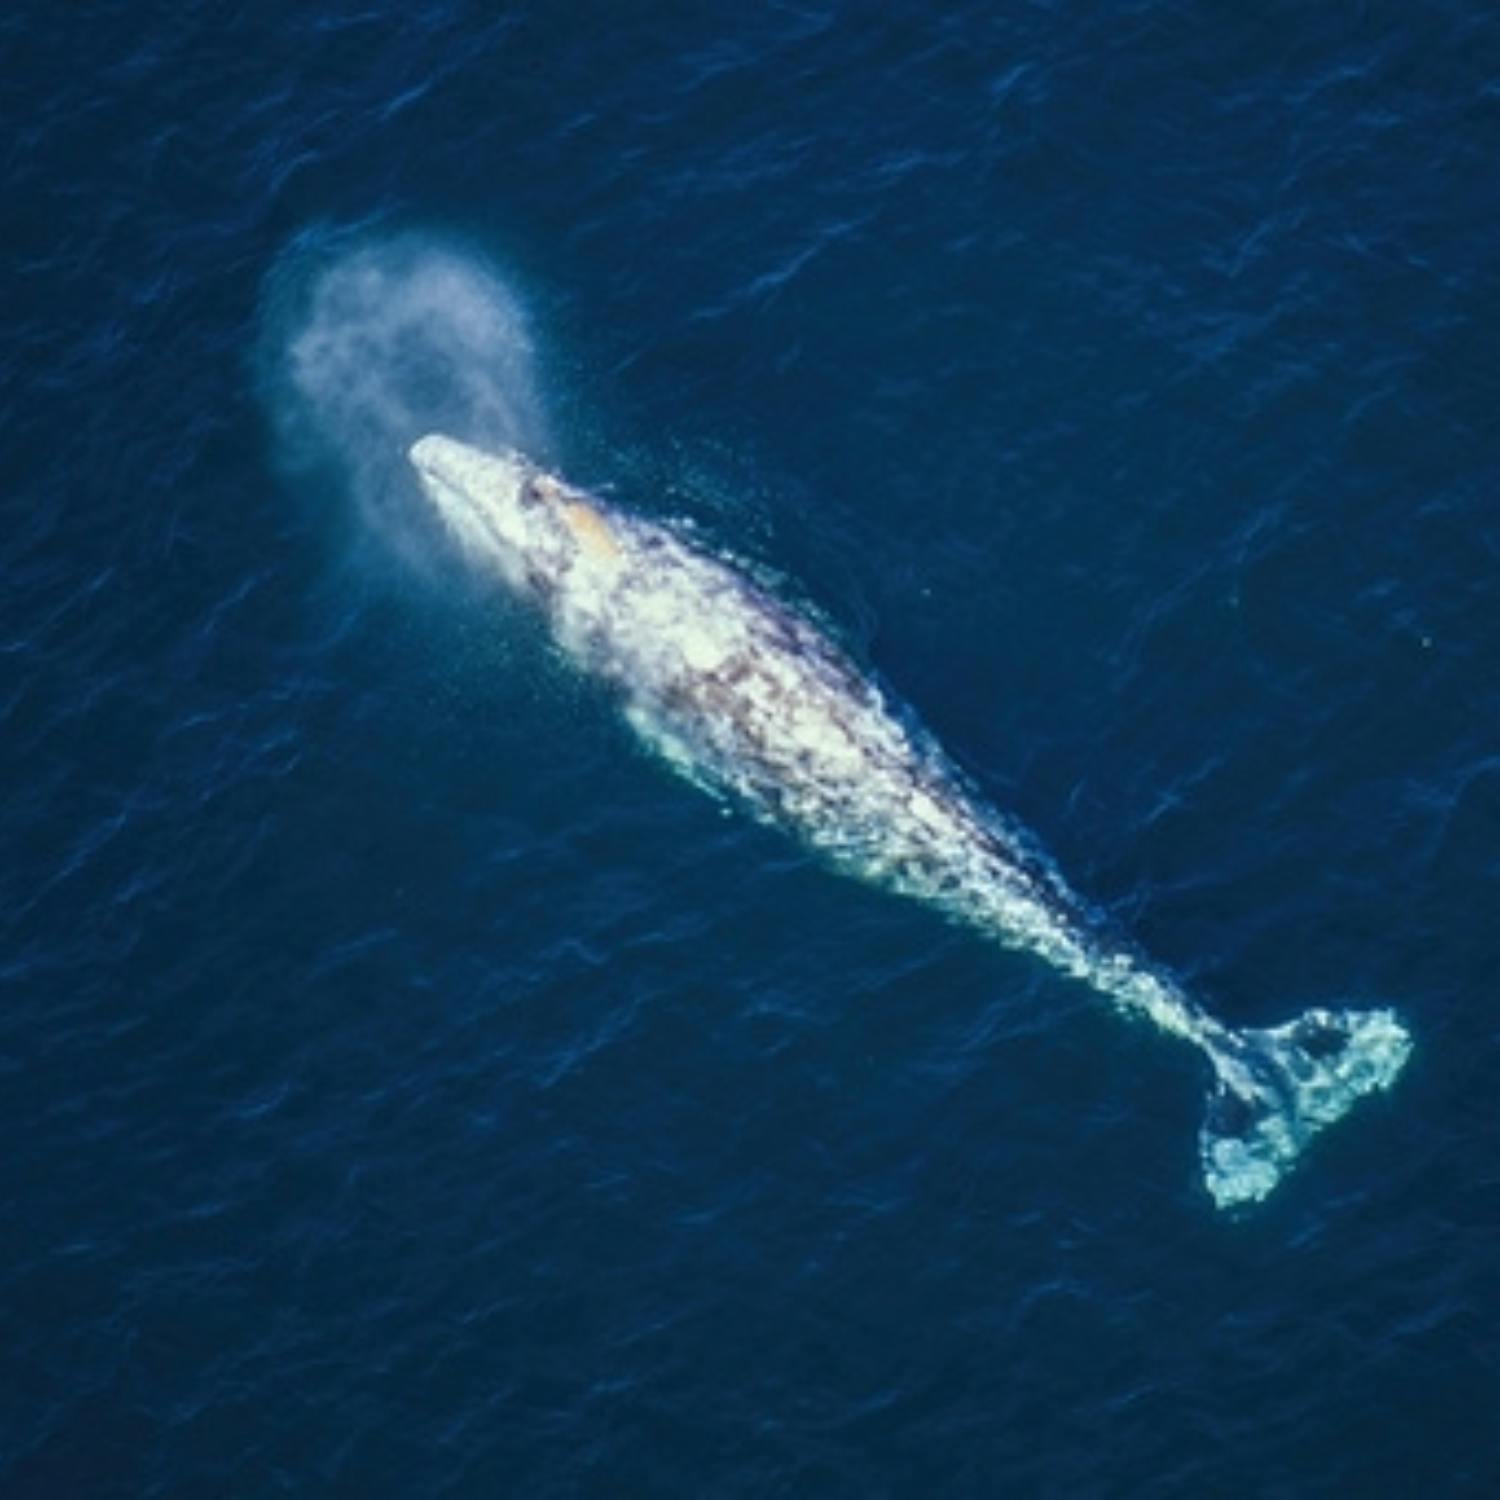 Pacific grey whales have shrunk by 13% in two decades